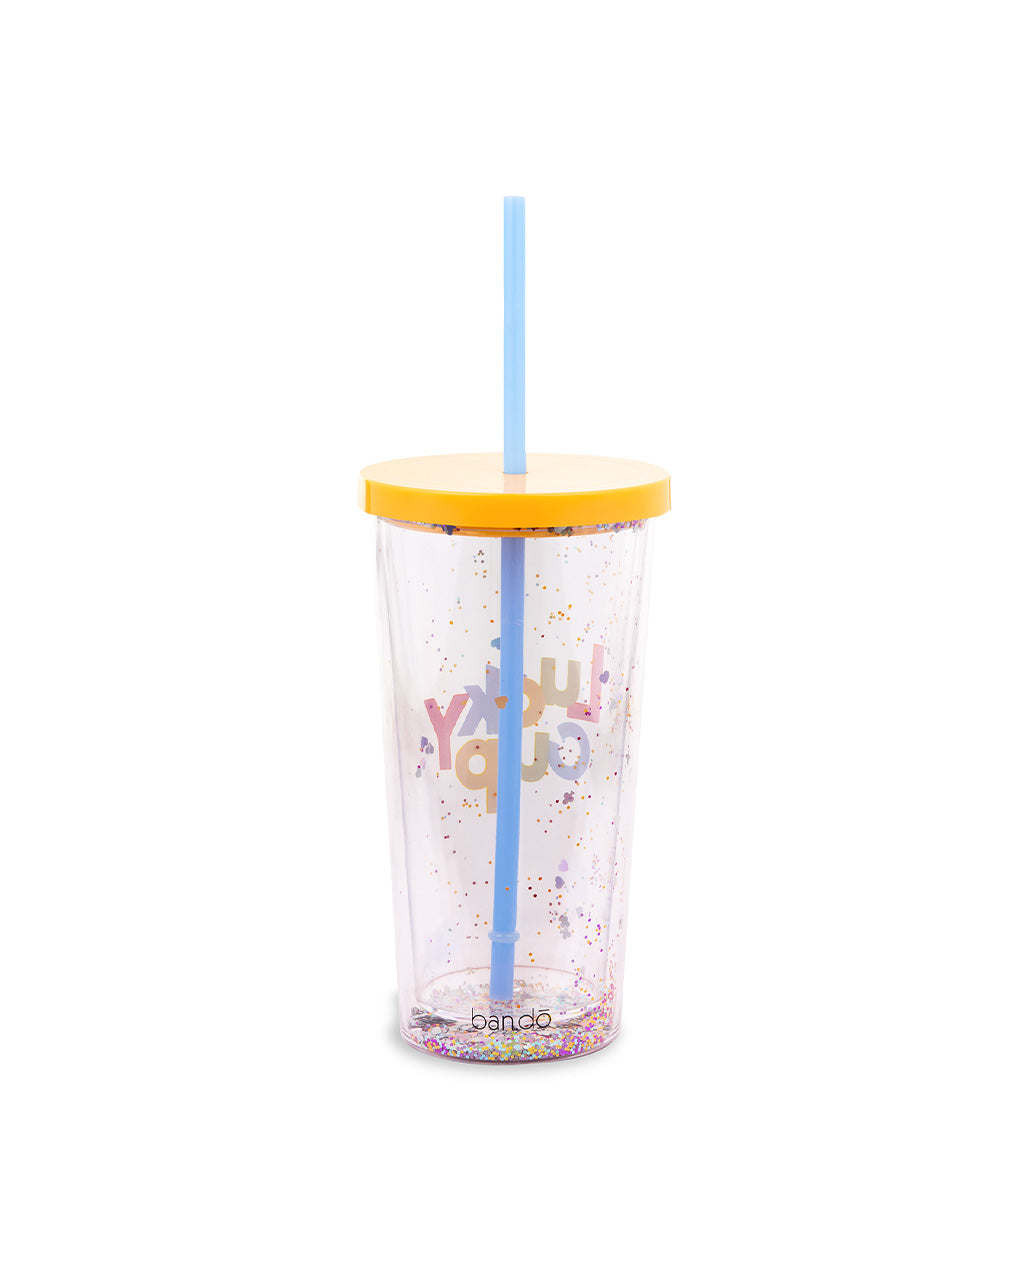 https://cdn.shopify.com/s/files/1/0787/5255/products/bando-il-glitterbomb-sip-sip-tumbler-glitter-bomb-sip-sip-tumbler-with-straw-lucky-me-02.jpg?v=1674058921